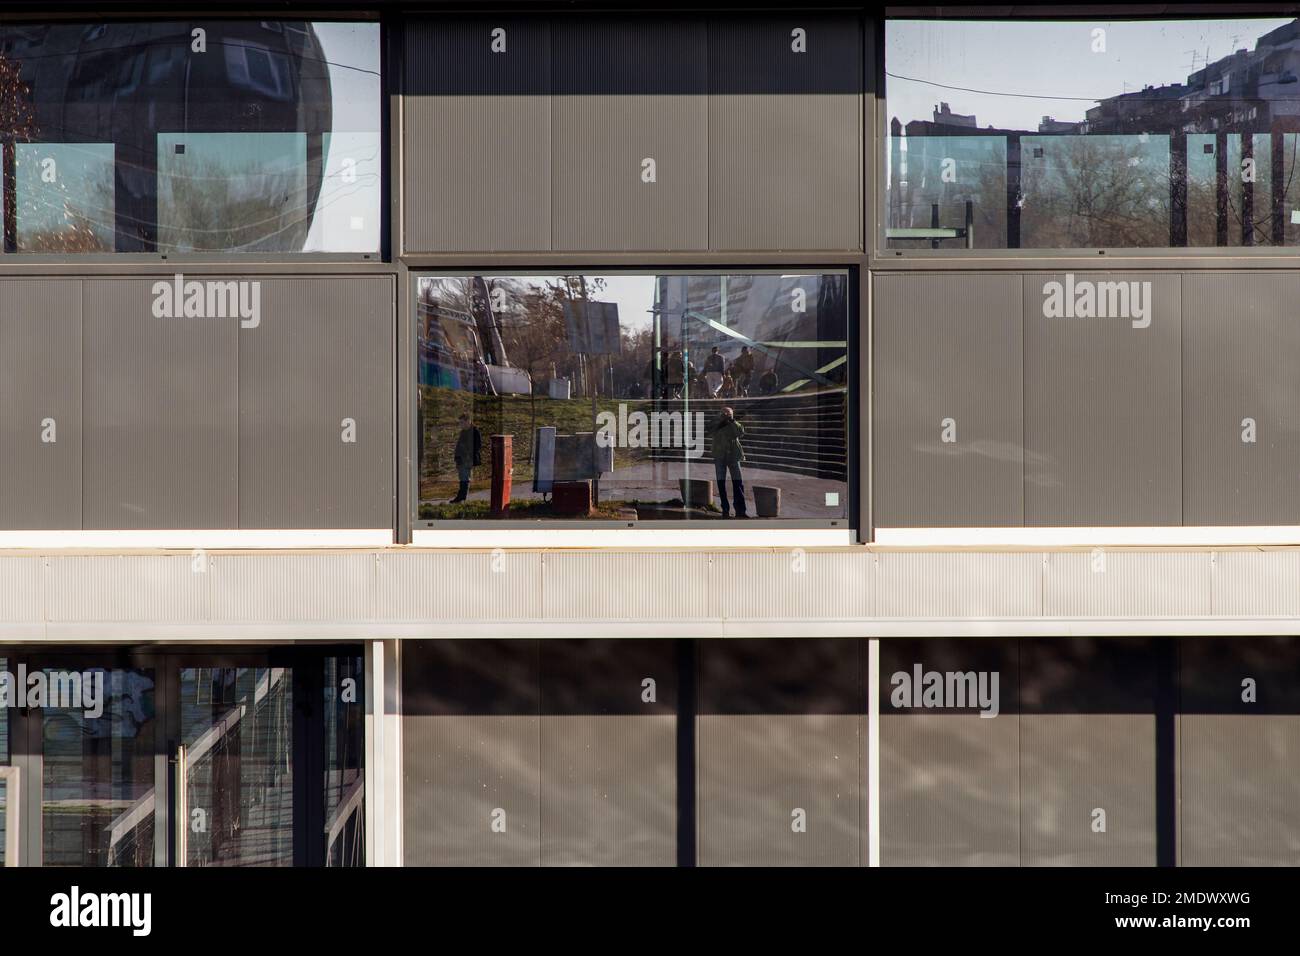 Reflections on the glass surfaces of a building facade Stock Photo